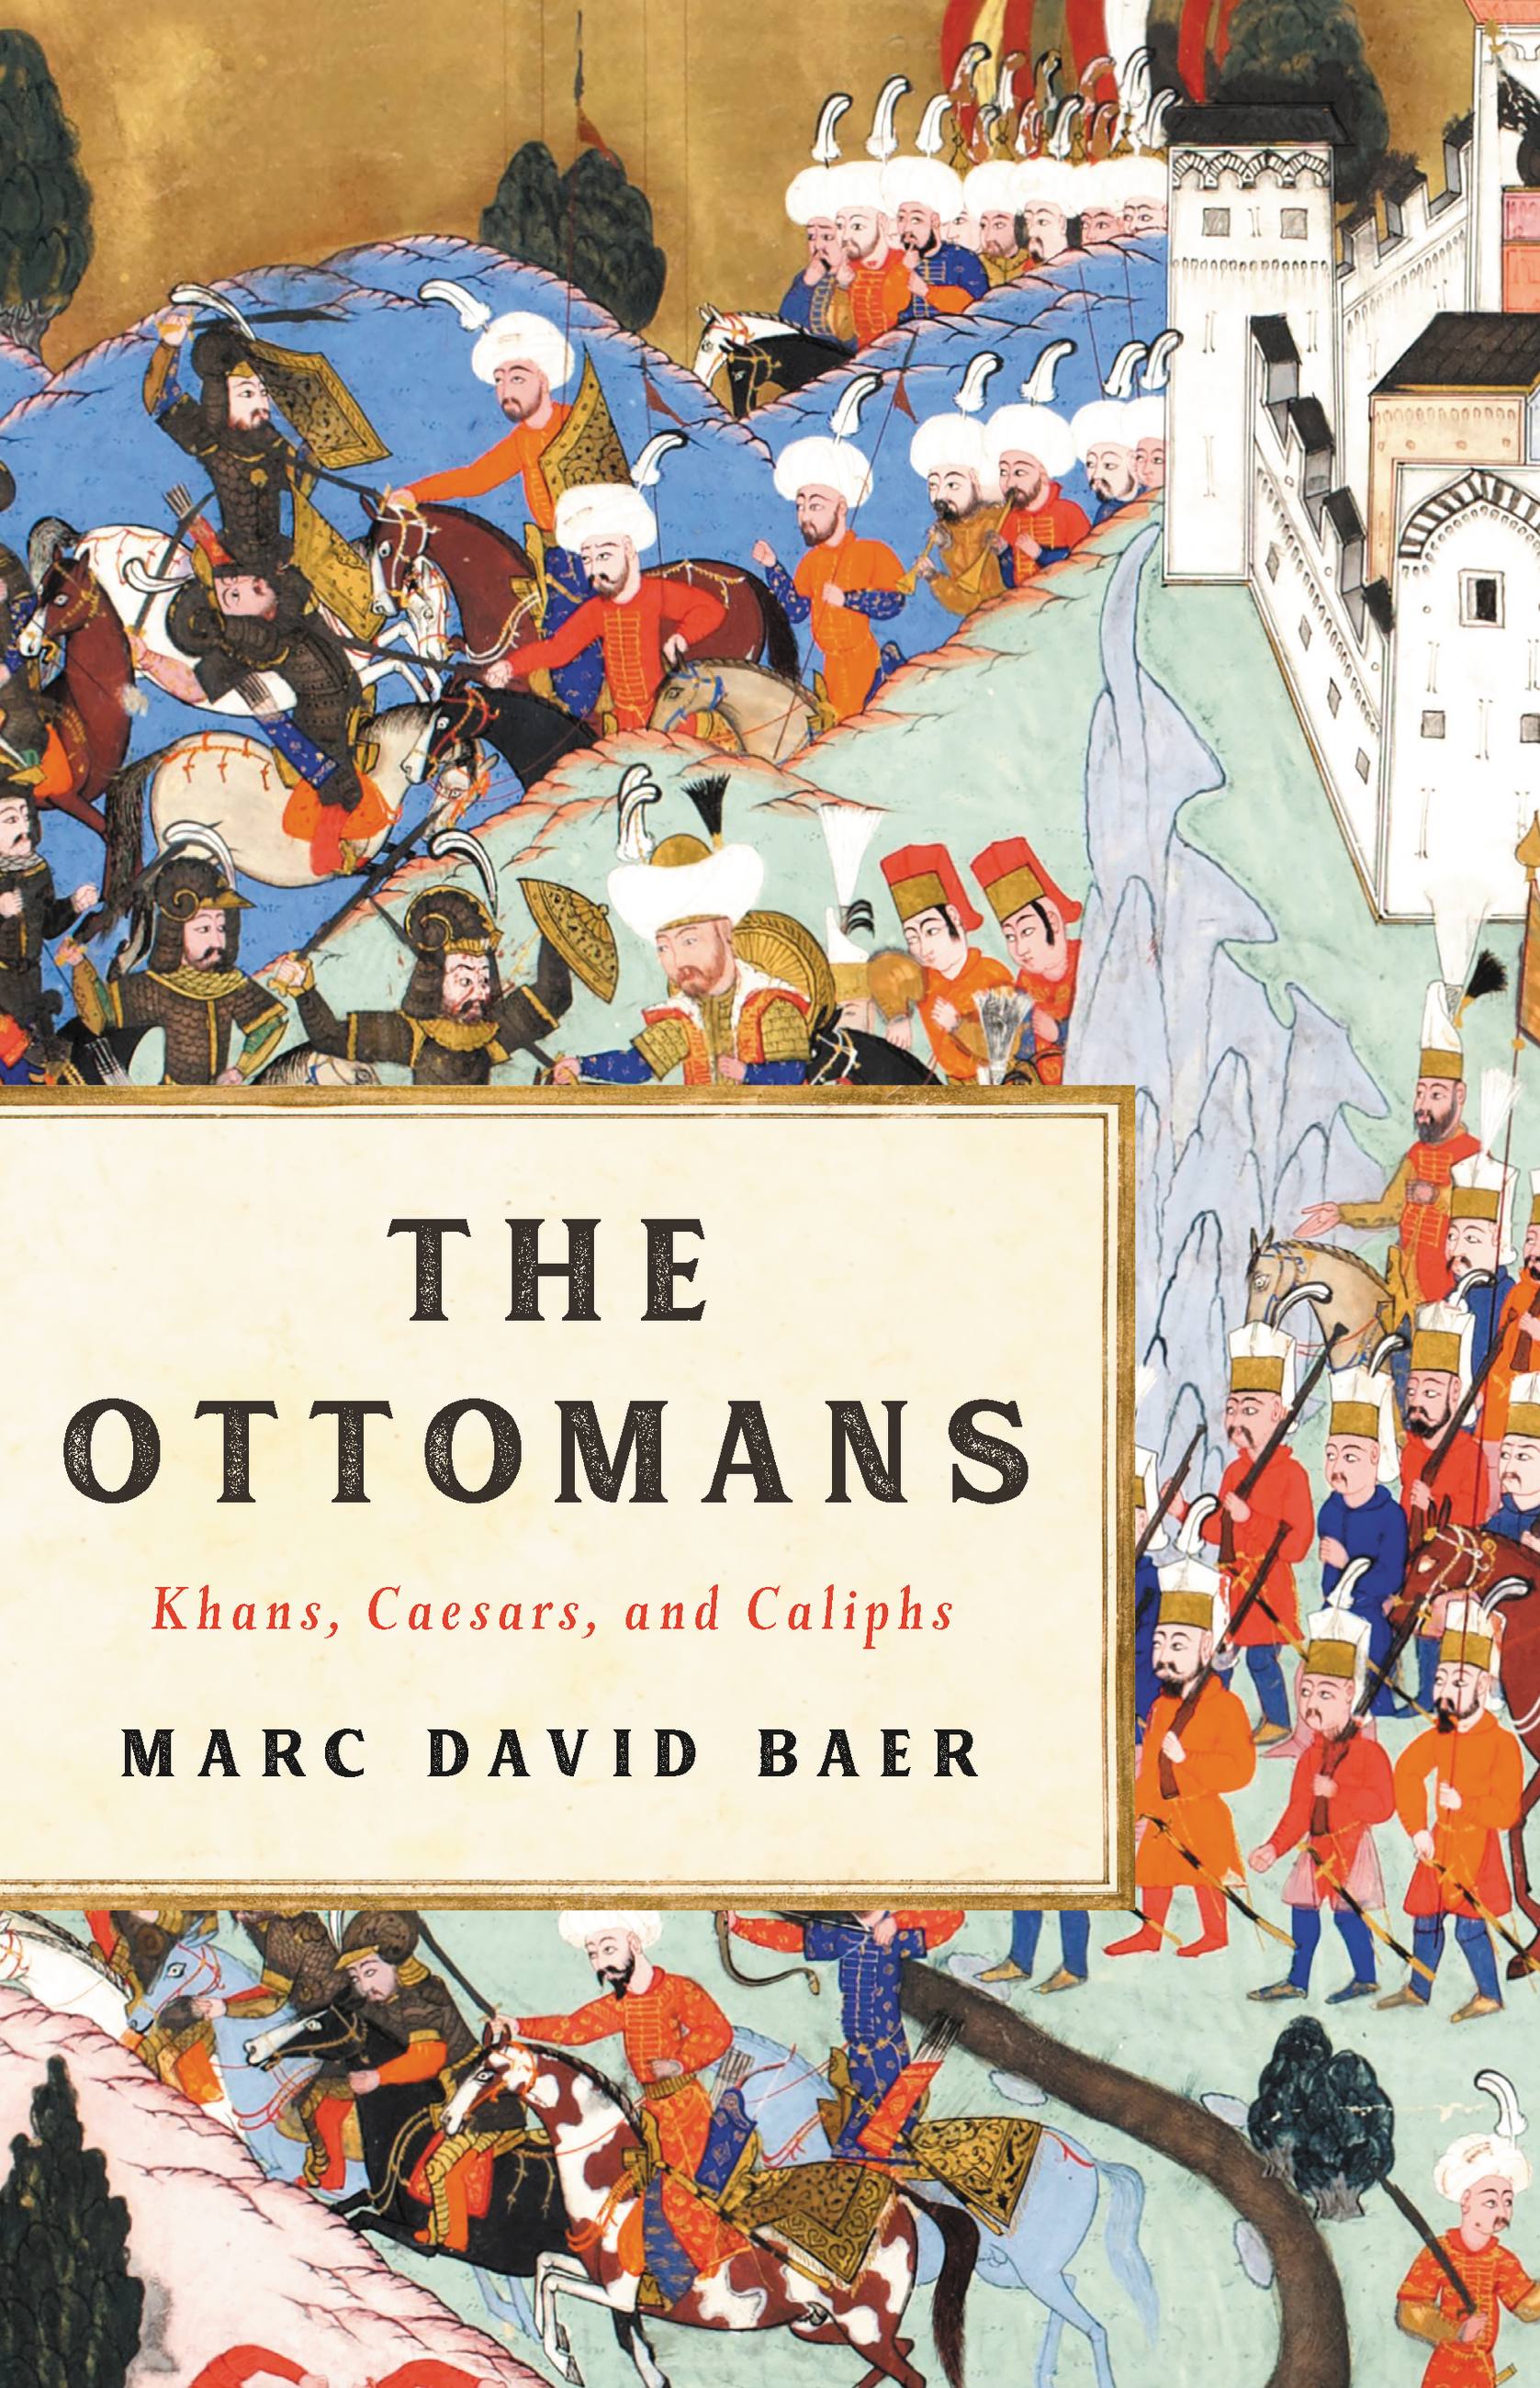 The Ottomans by Marc David Baer Hachette Book Group